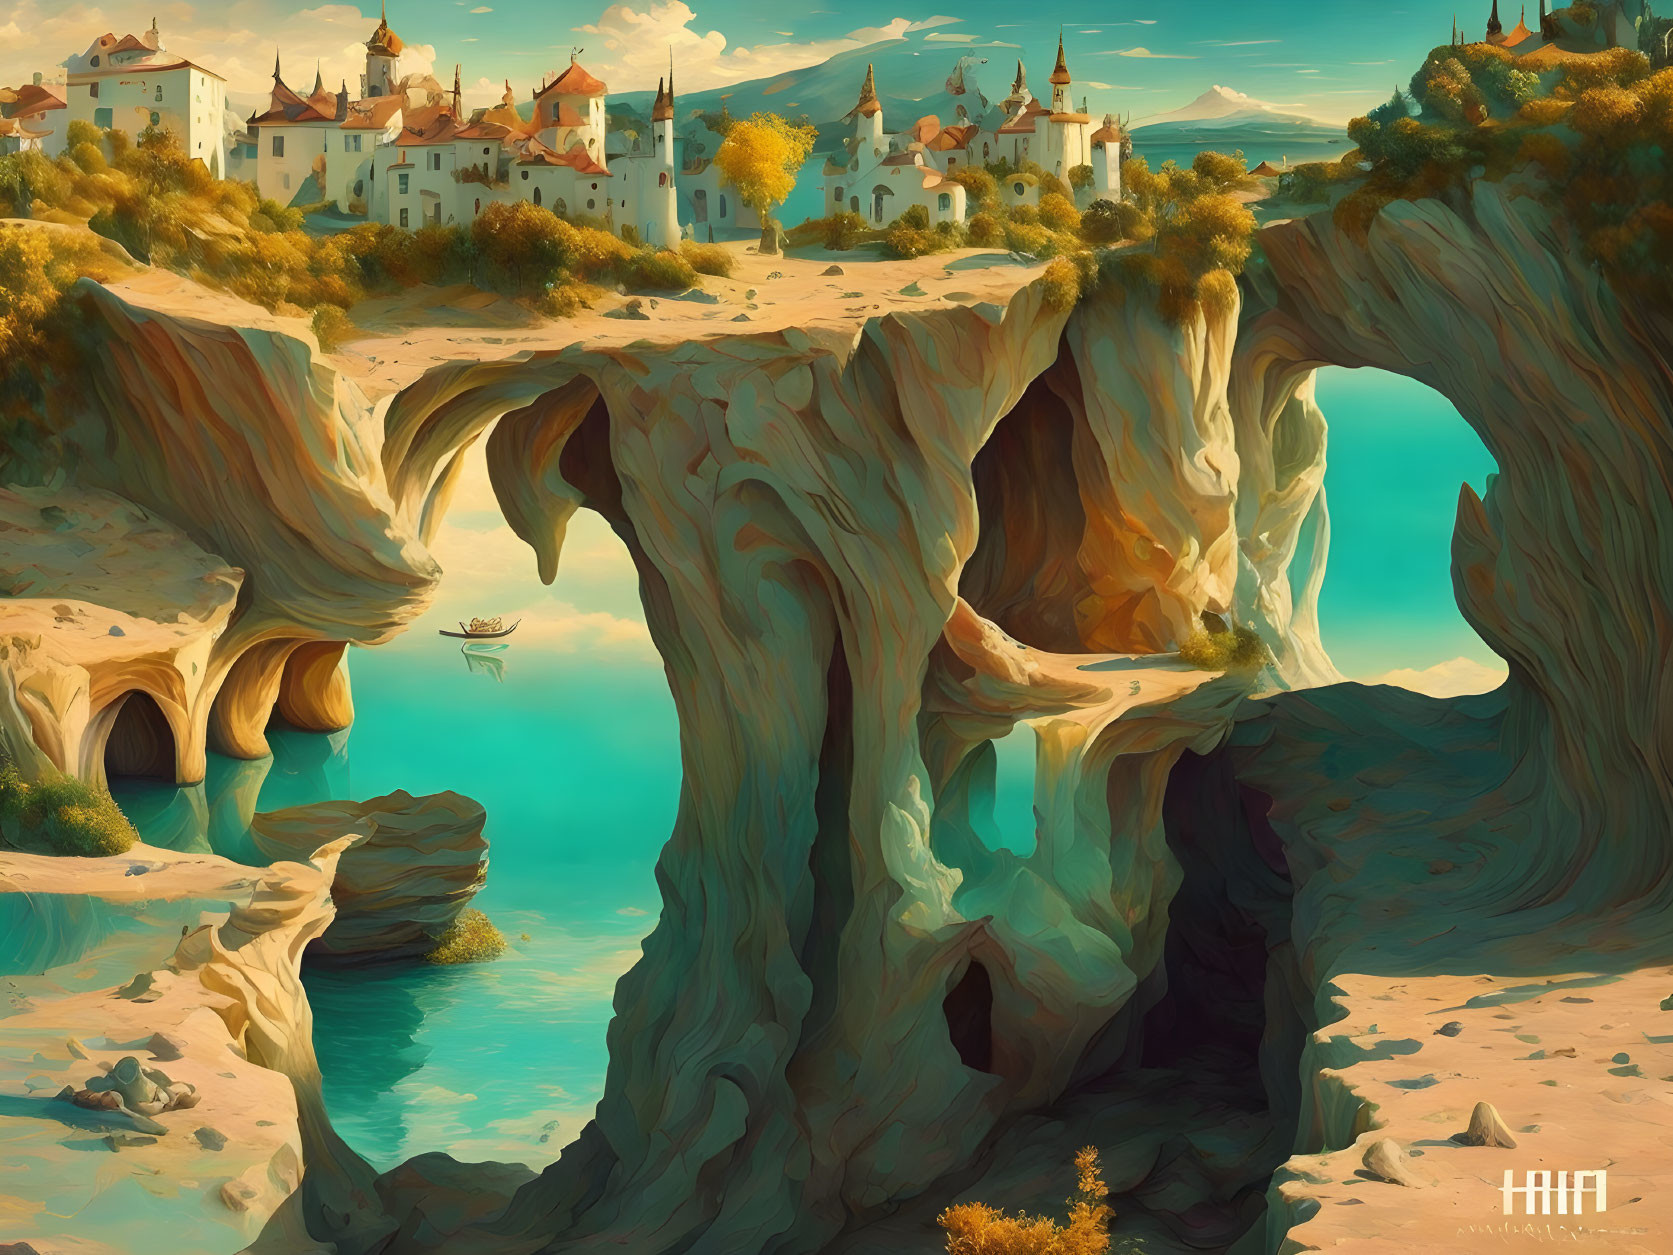 Fantasy artwork: Stone arch formation, town, tranquil landscape